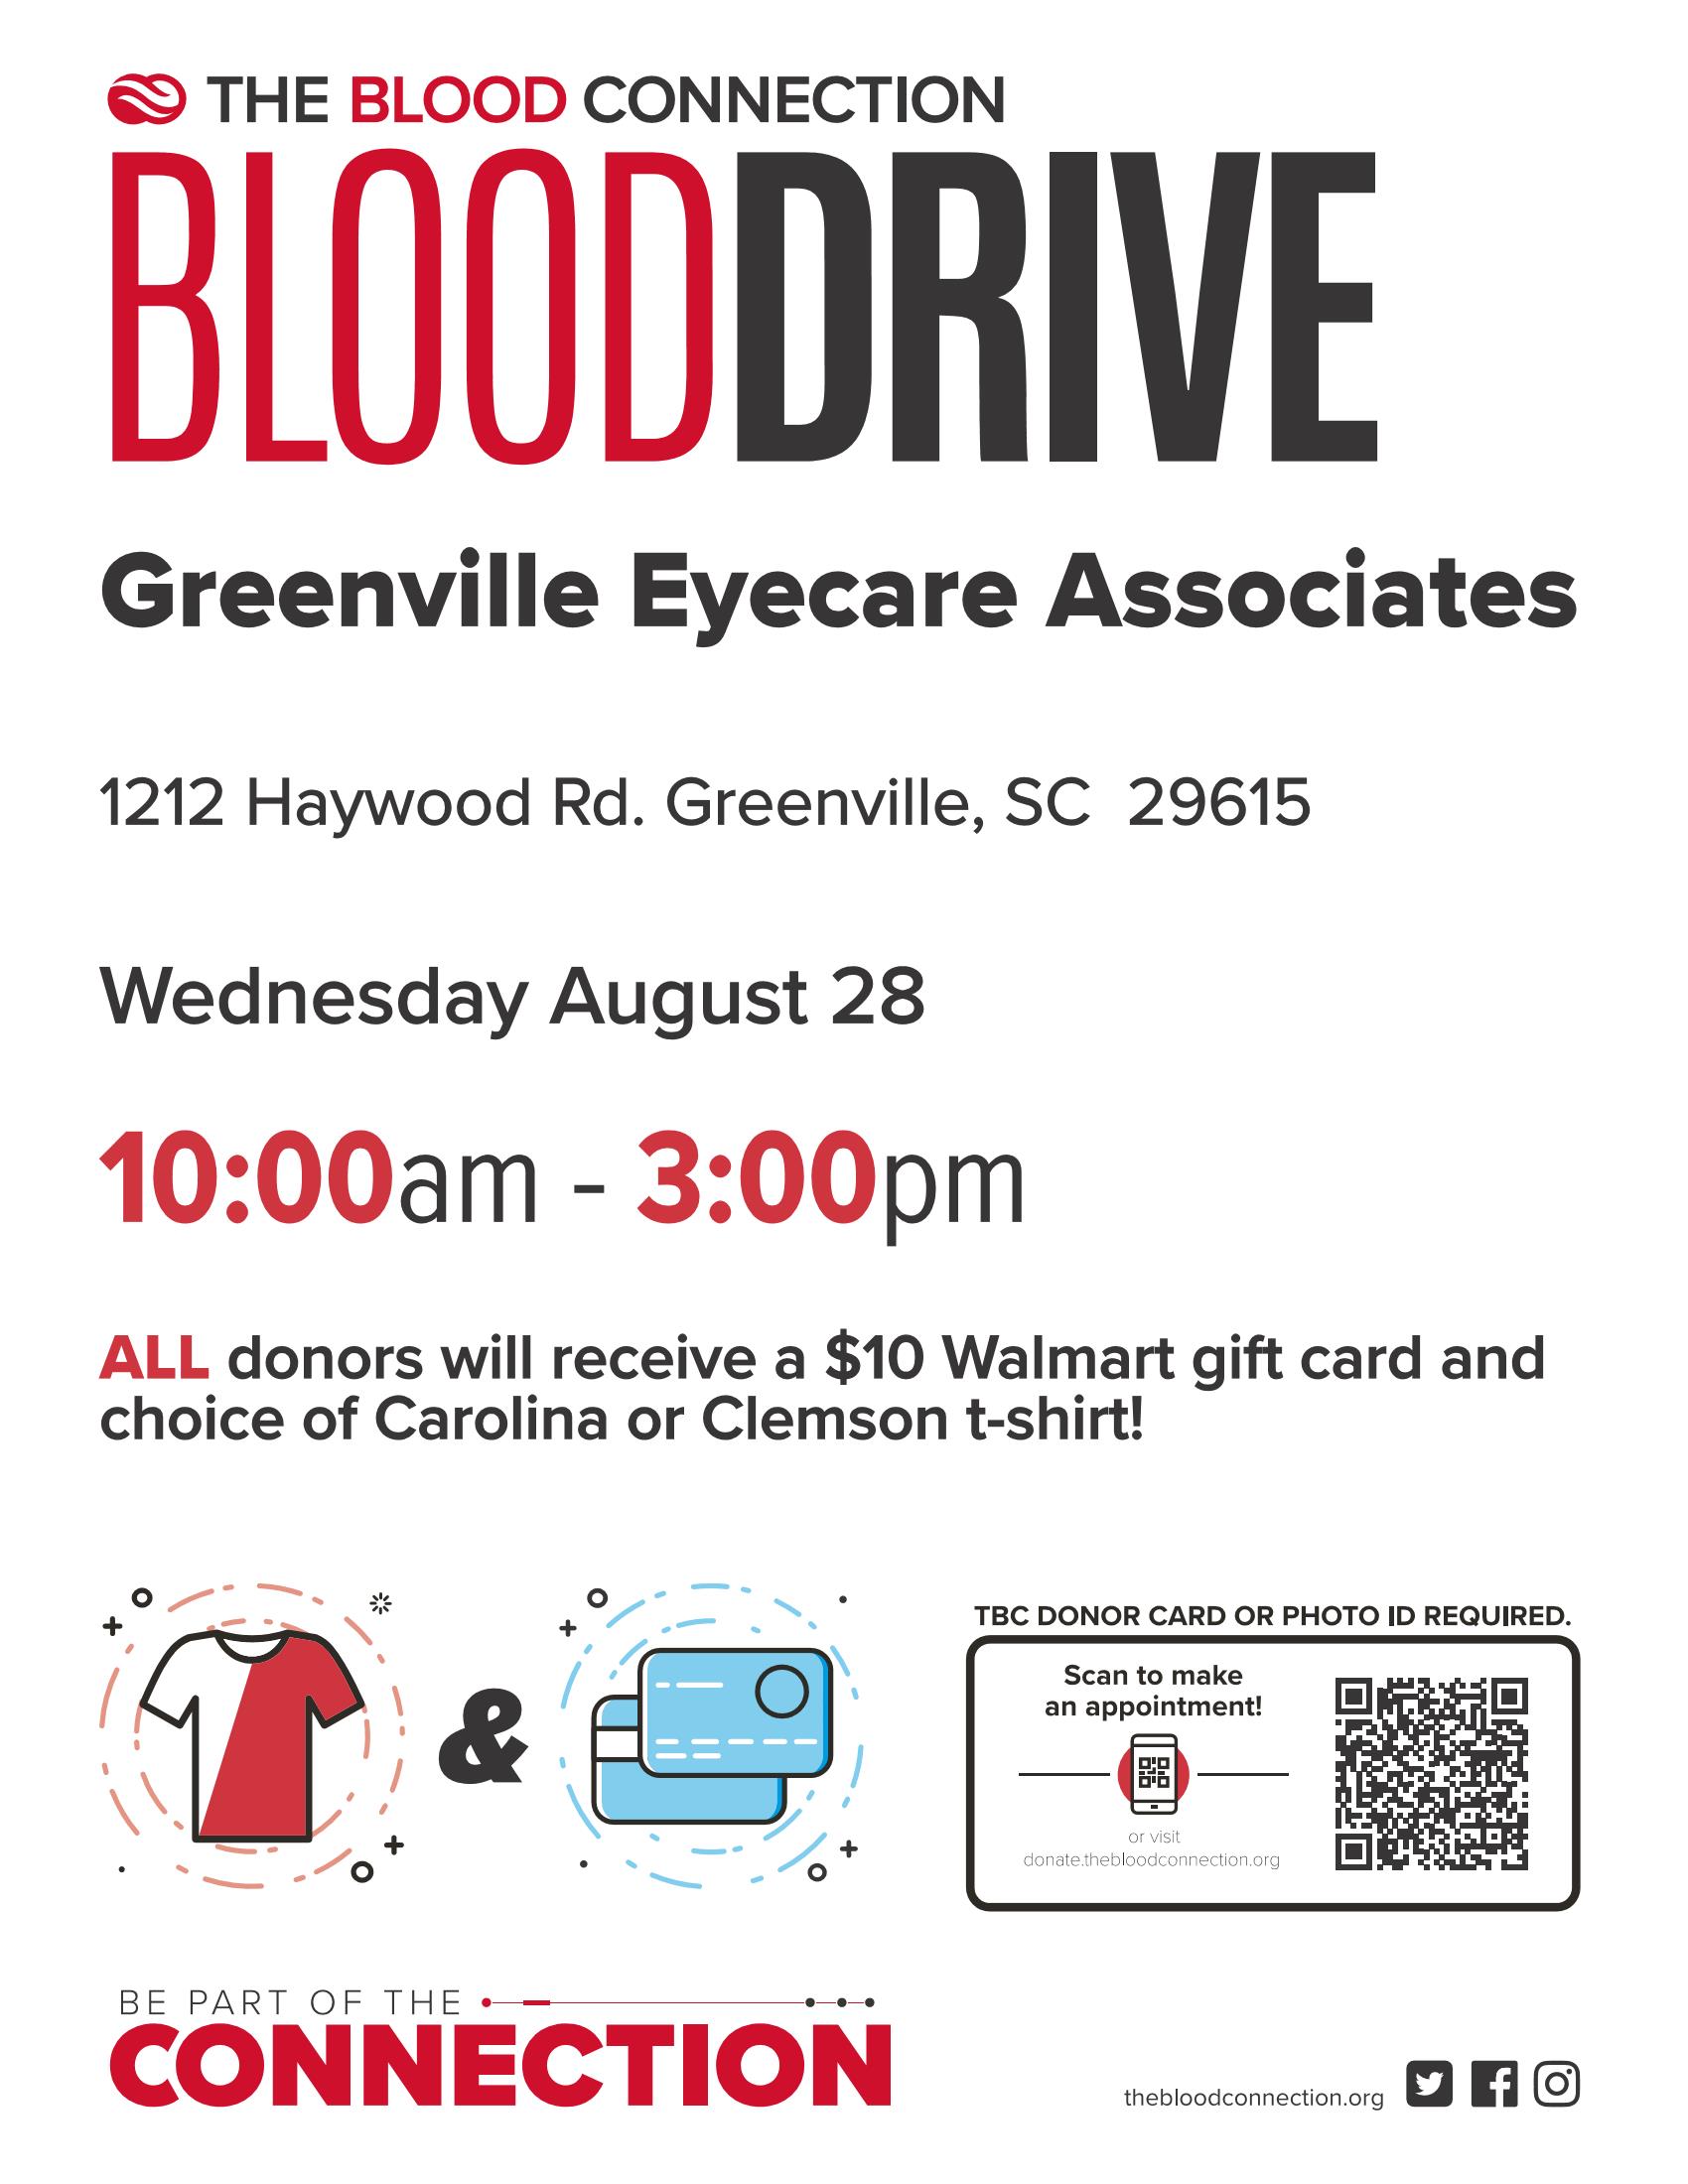 blood drive - calls for details